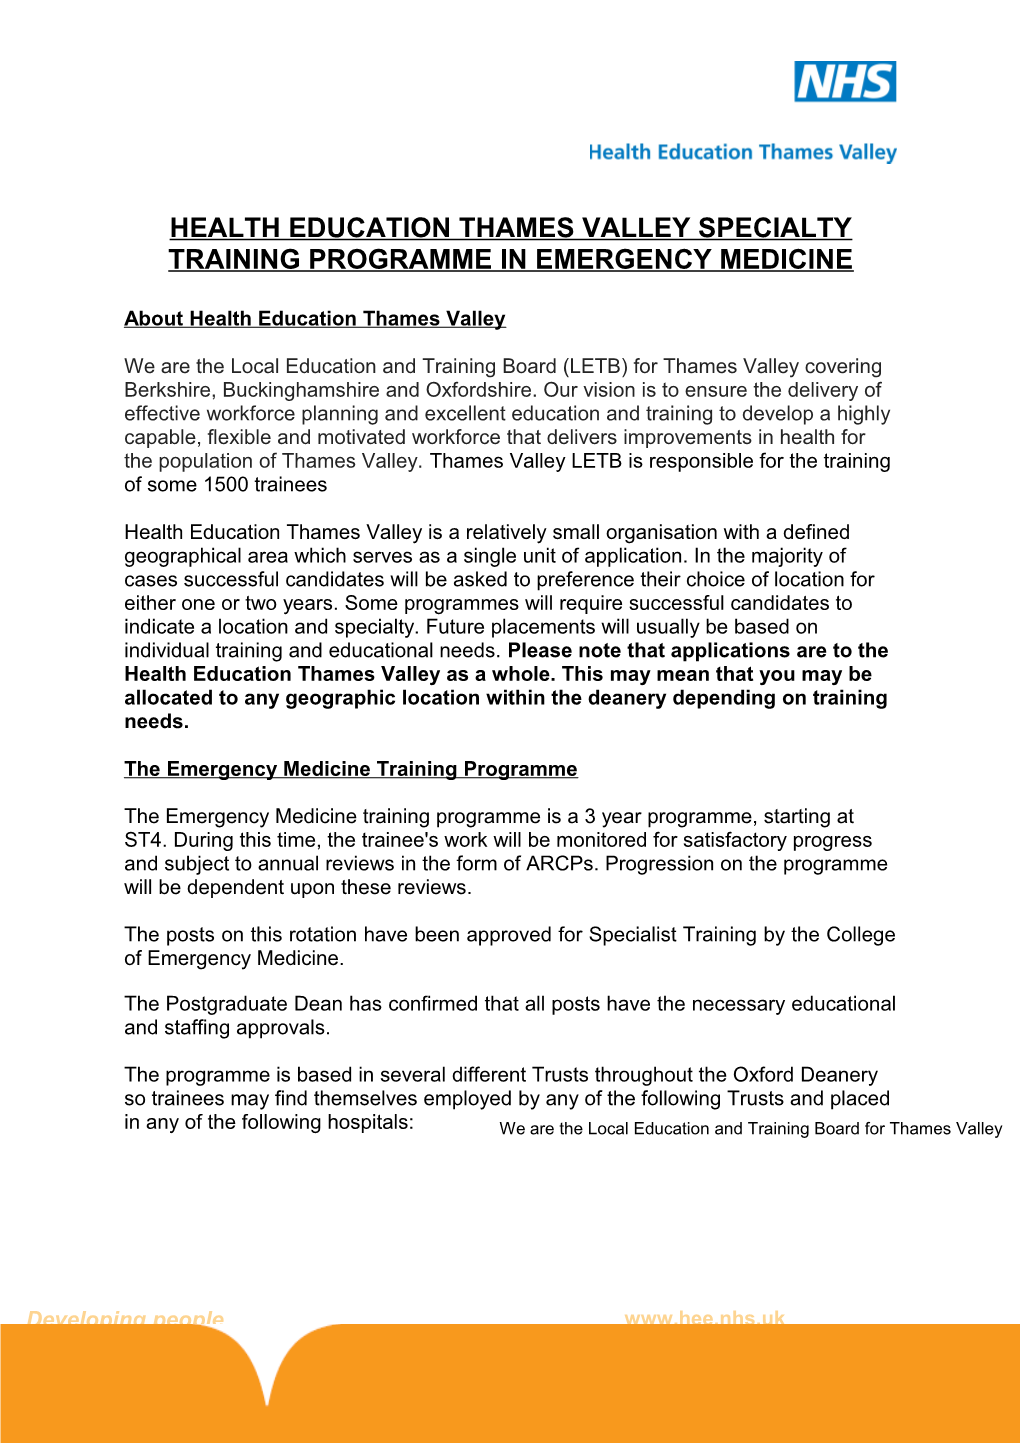 Health Education Thames Valley Specialty Training Programme in Emergency Medicine